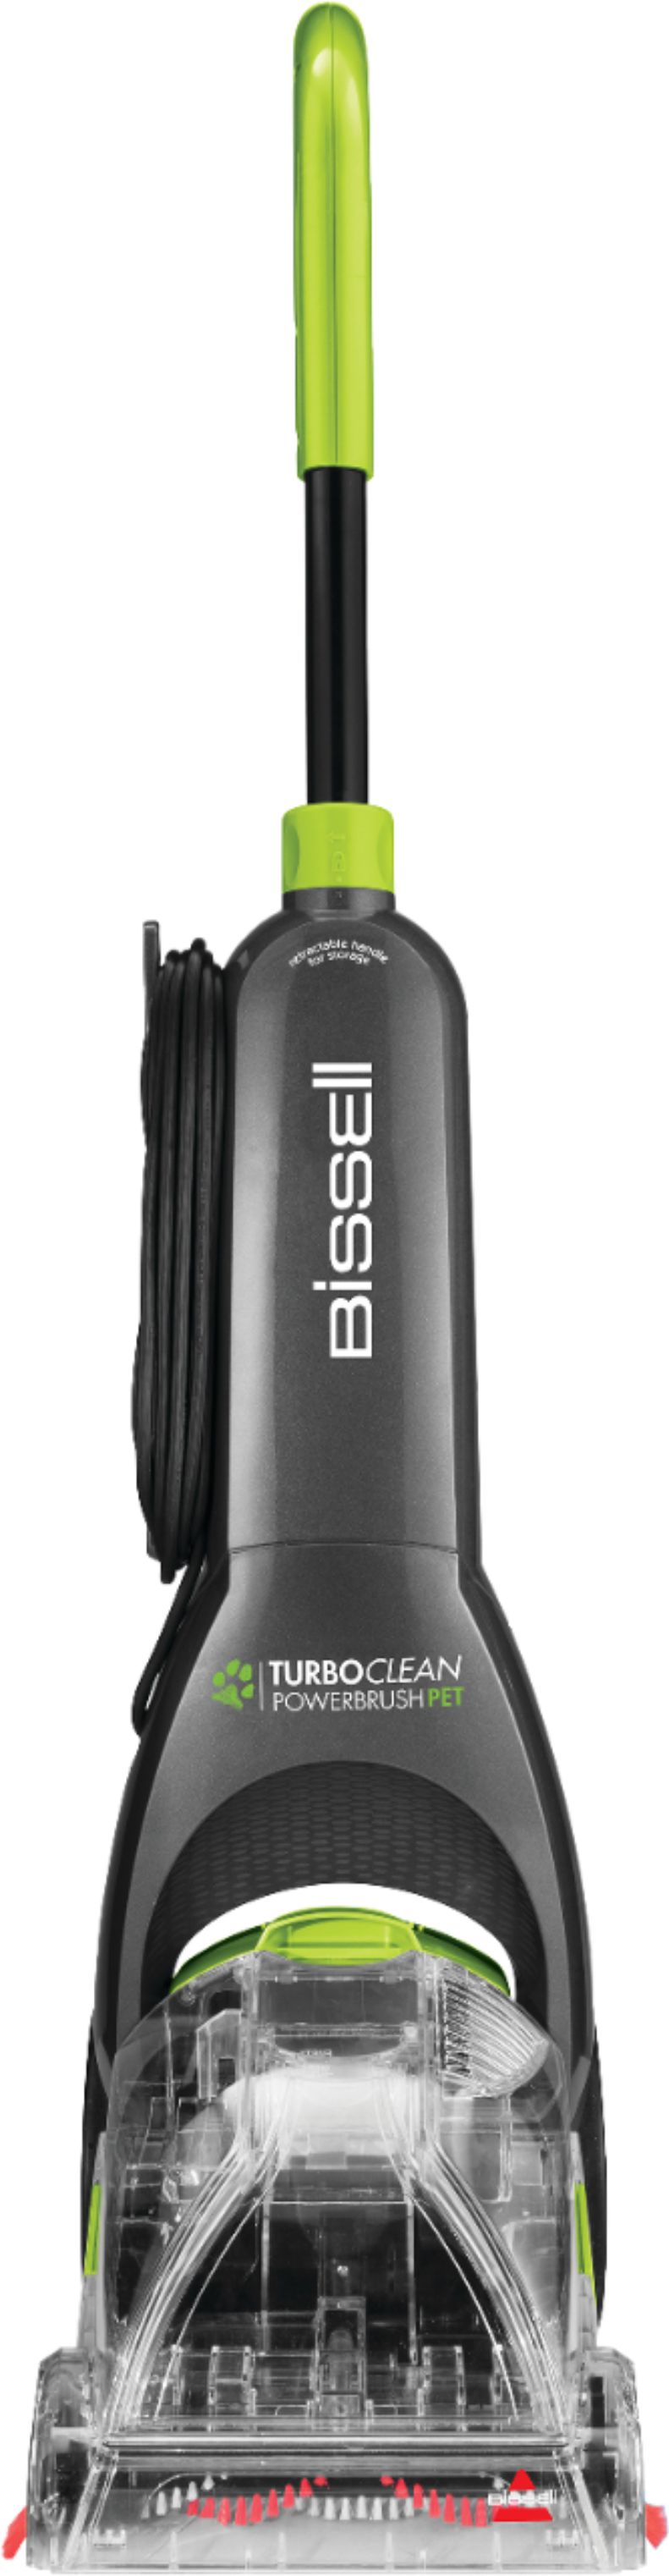 Customer Reviews: BISSELL TurboClean™ PowerBrush Pet Carpet Cleaner  Titanium with ChaCha Lime Accents 2085 - Best Buy